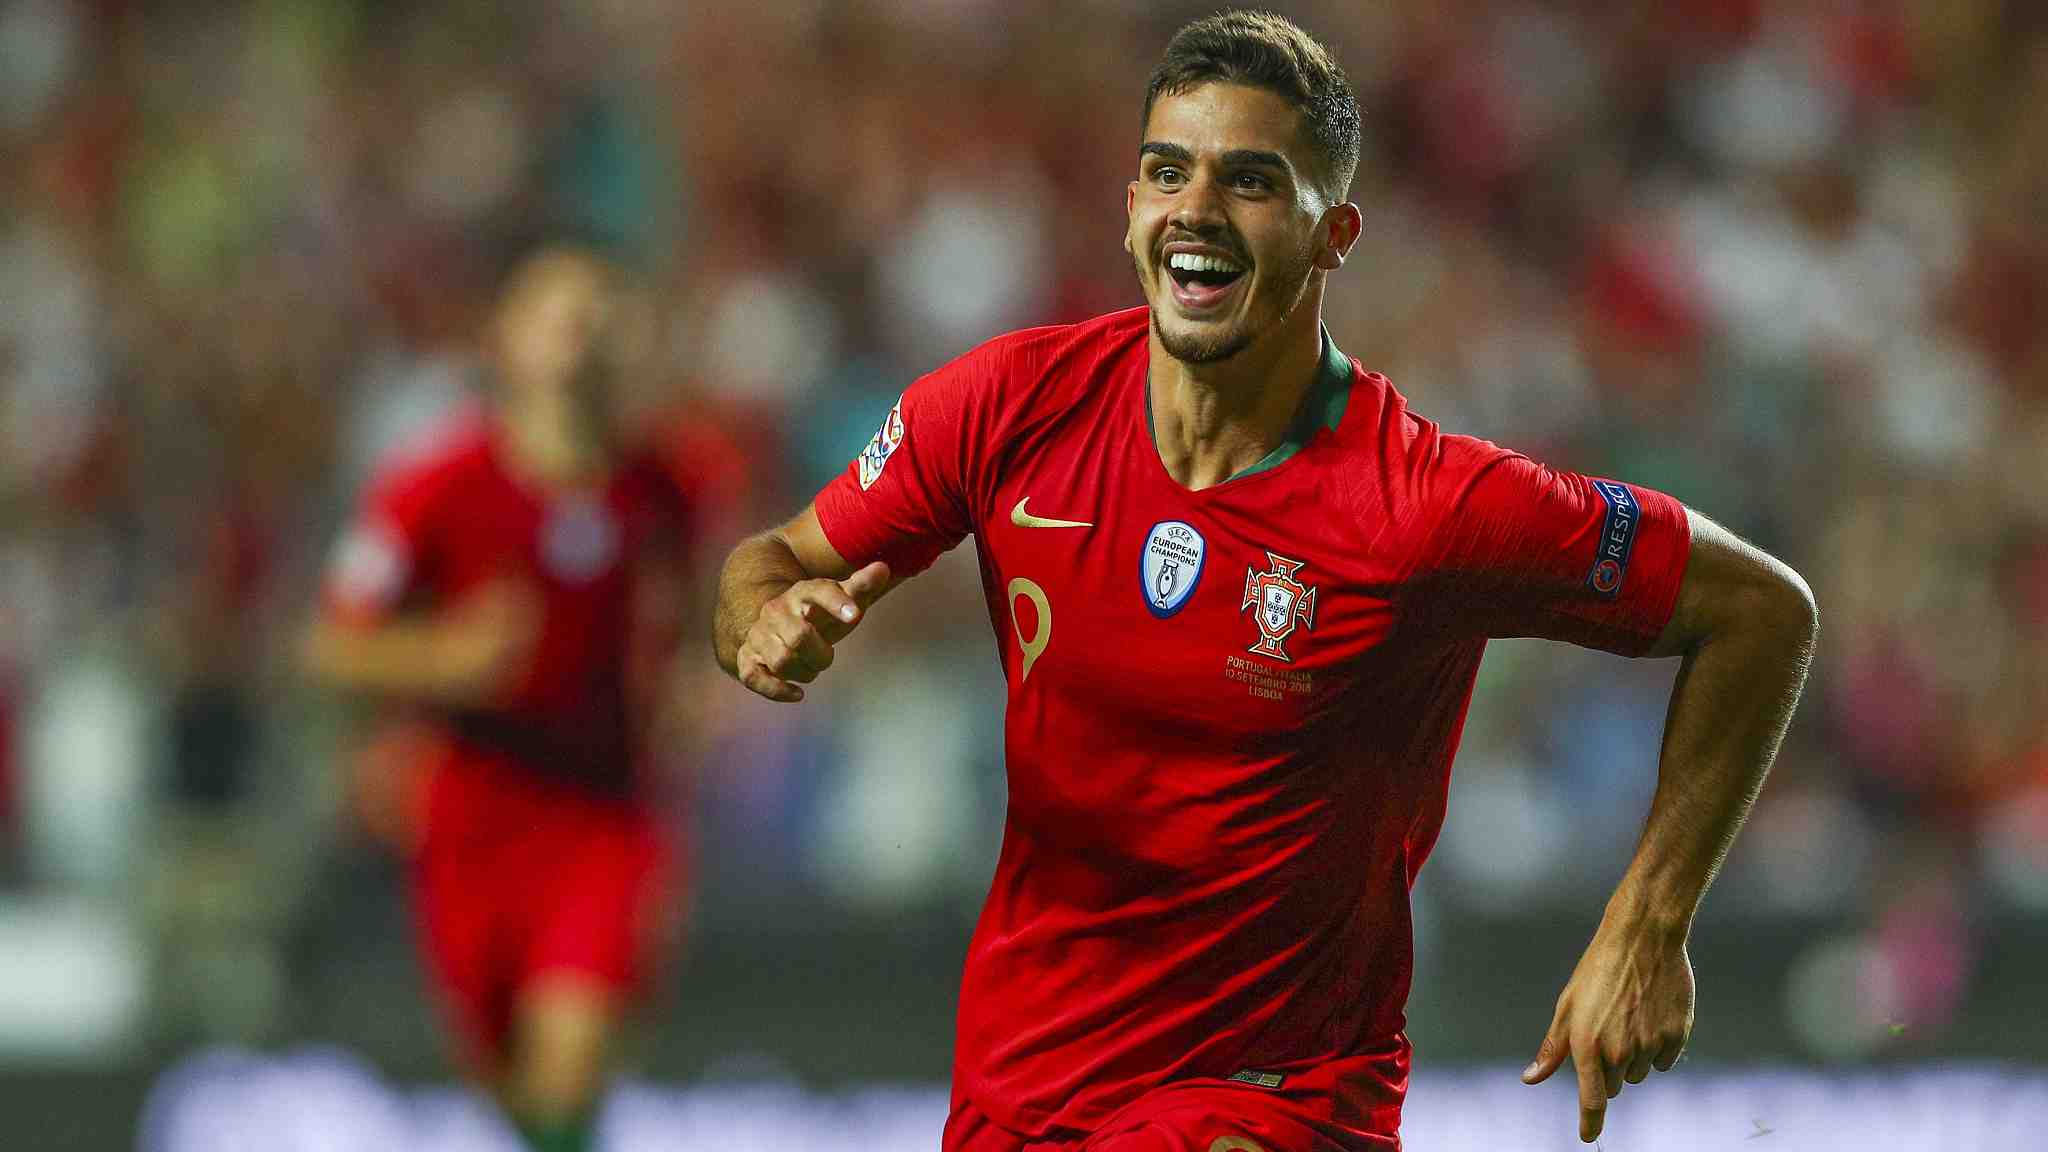 Silva scores as Portugal beat Italy in Nations League